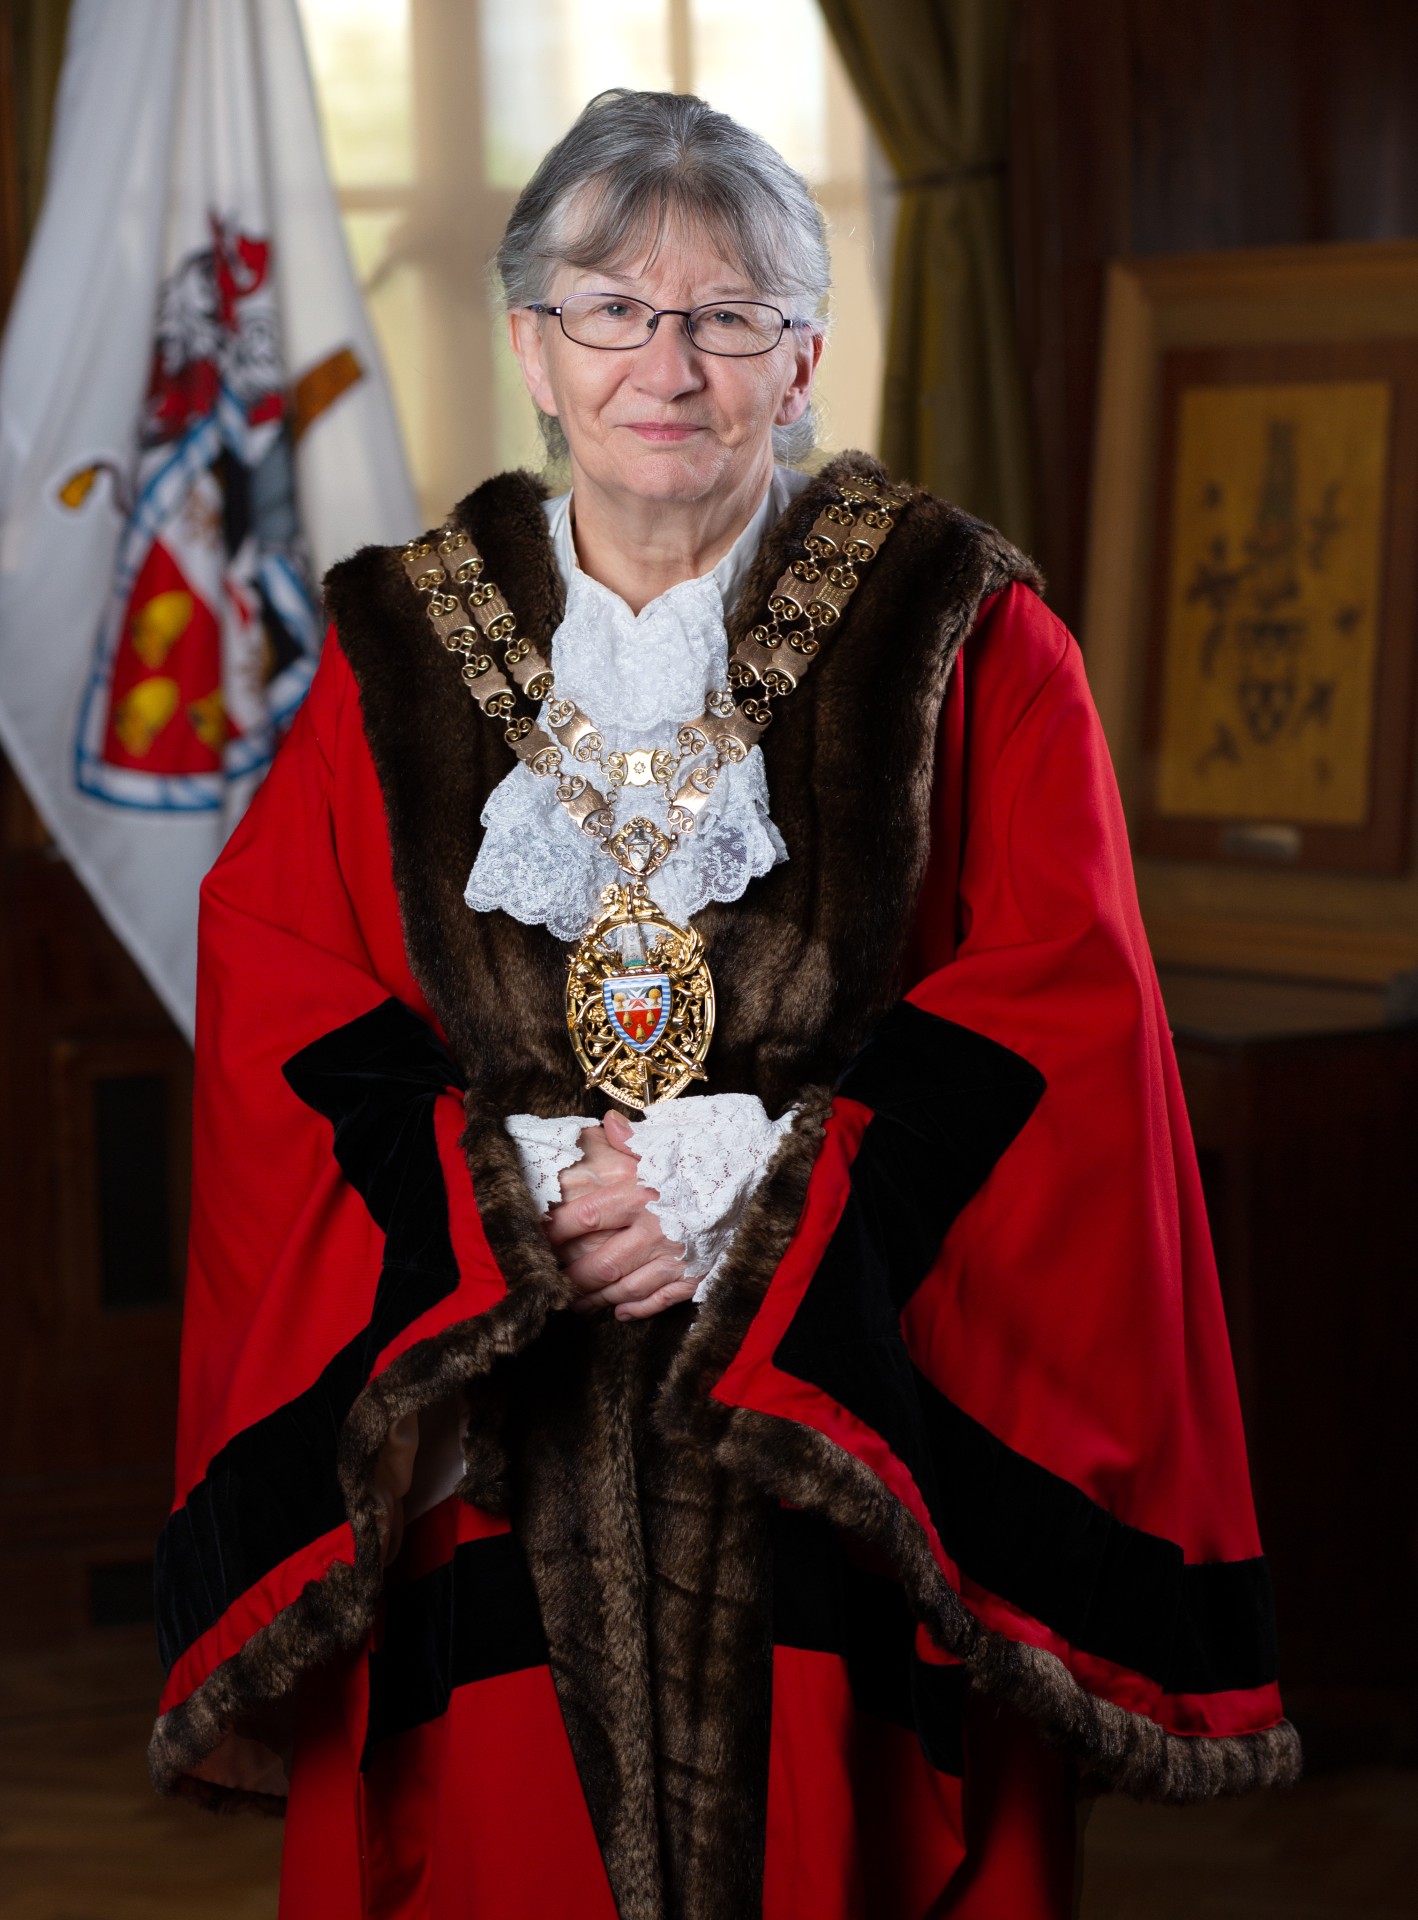 Professional portrait of the Speaker of Hackney wearing an official robe, smiling at the camera.